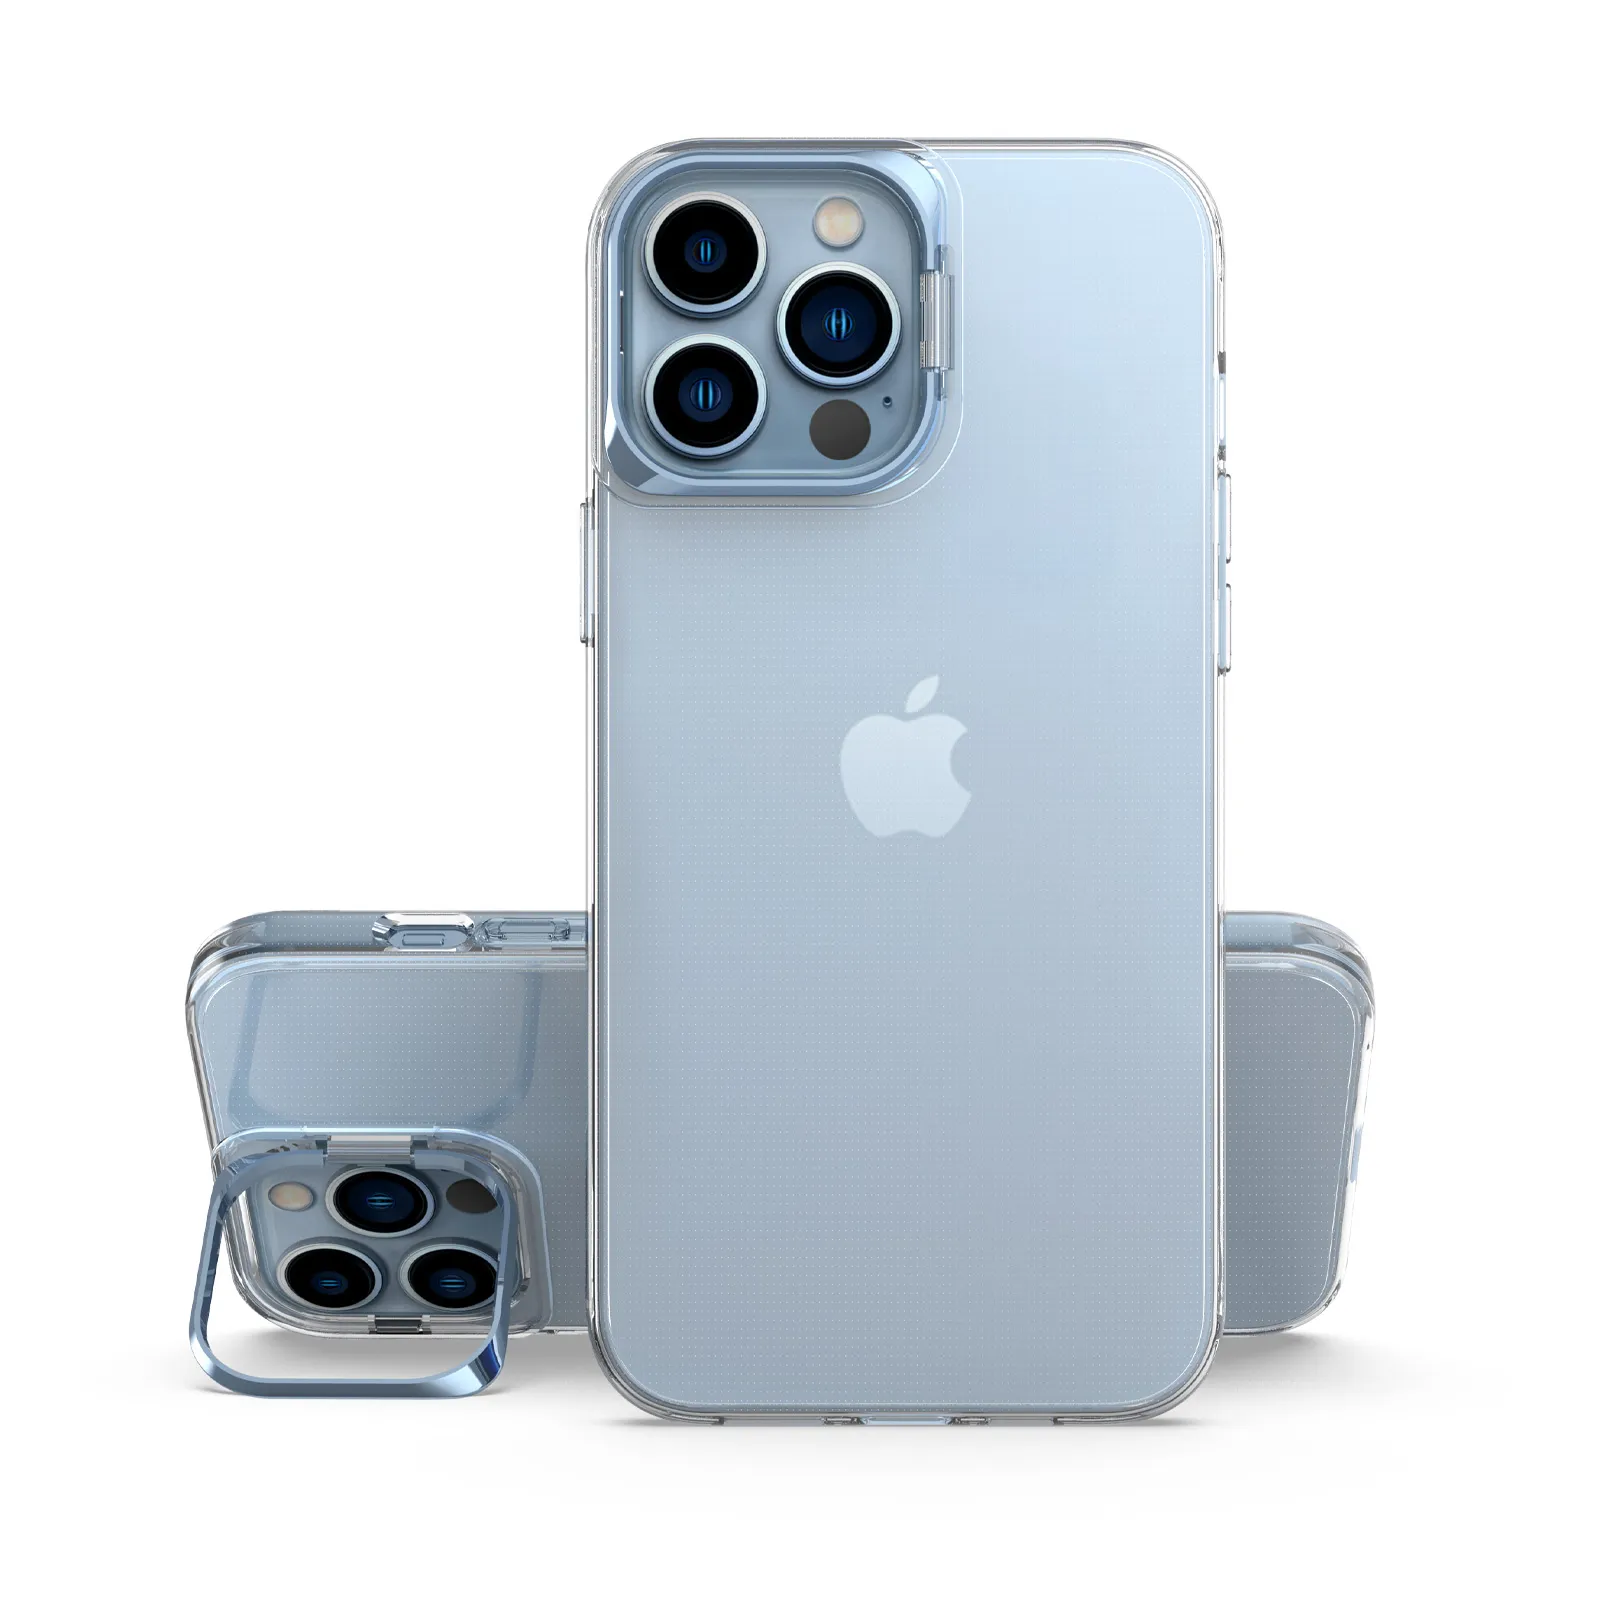 Soft TPU 4 conner shockproof case multi-function phone camera lens protection metal kickstand case for iPhone 11 12 13